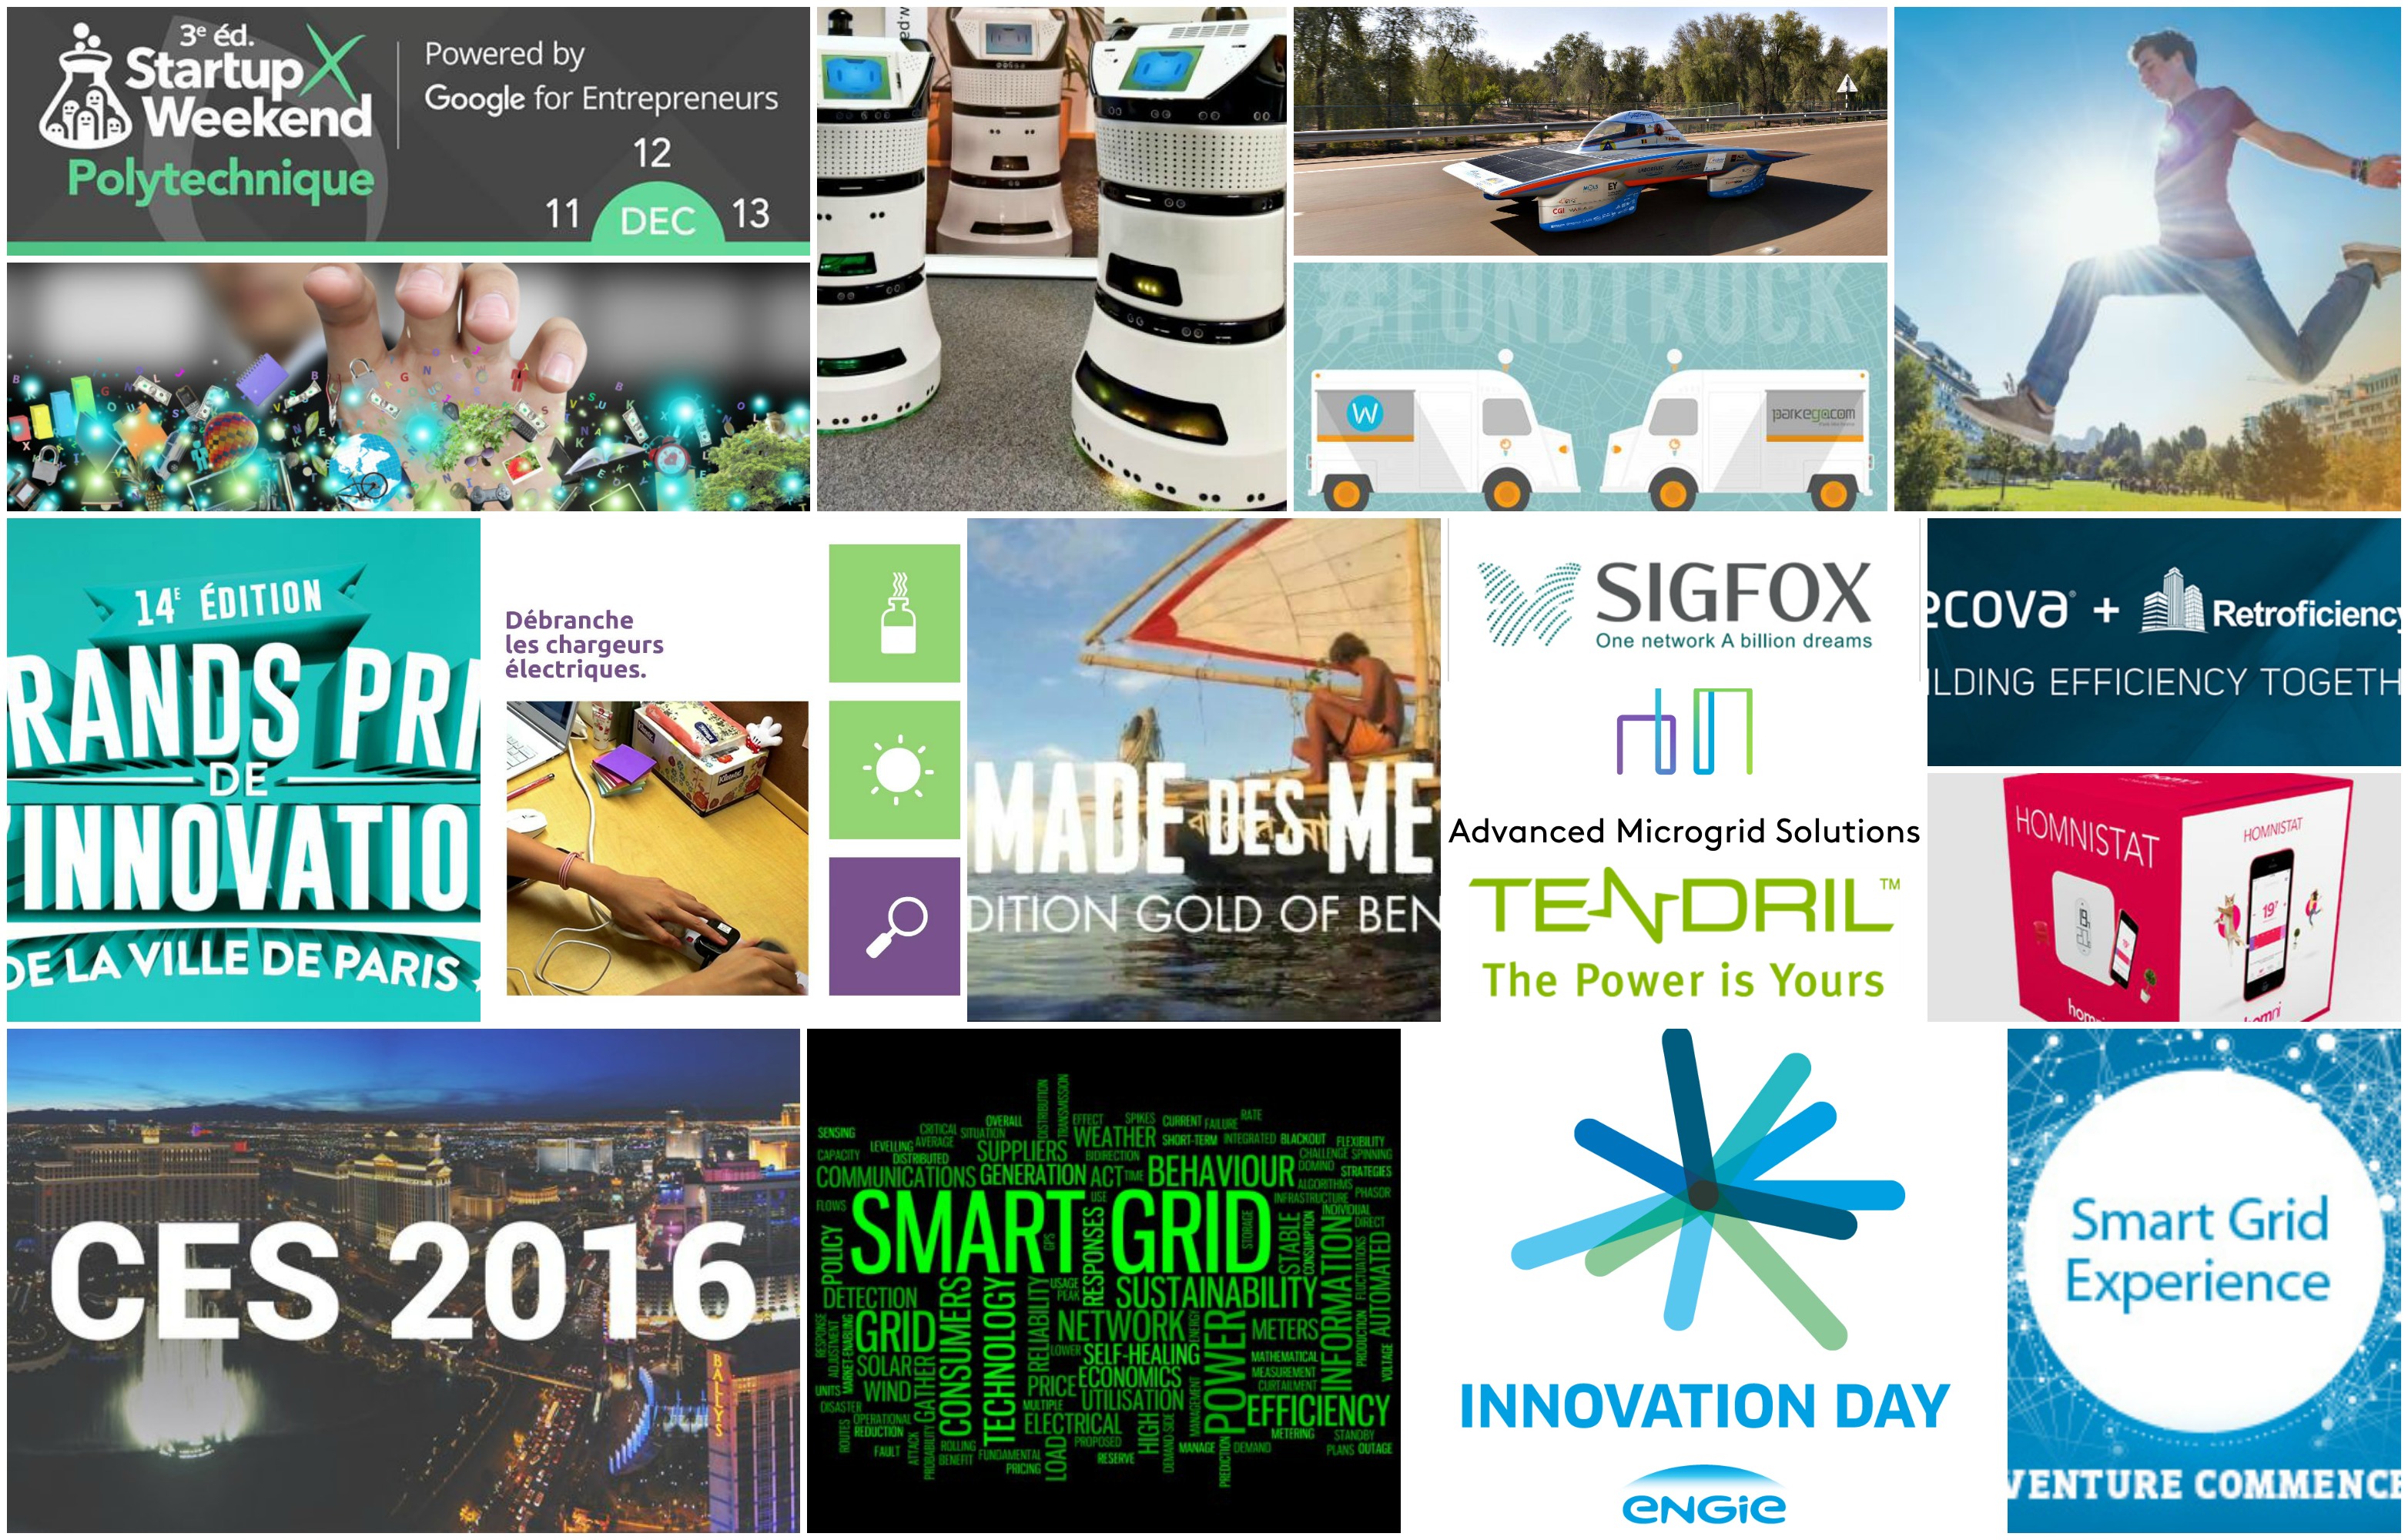 ENGIE at the center of the world of innovation in 2015